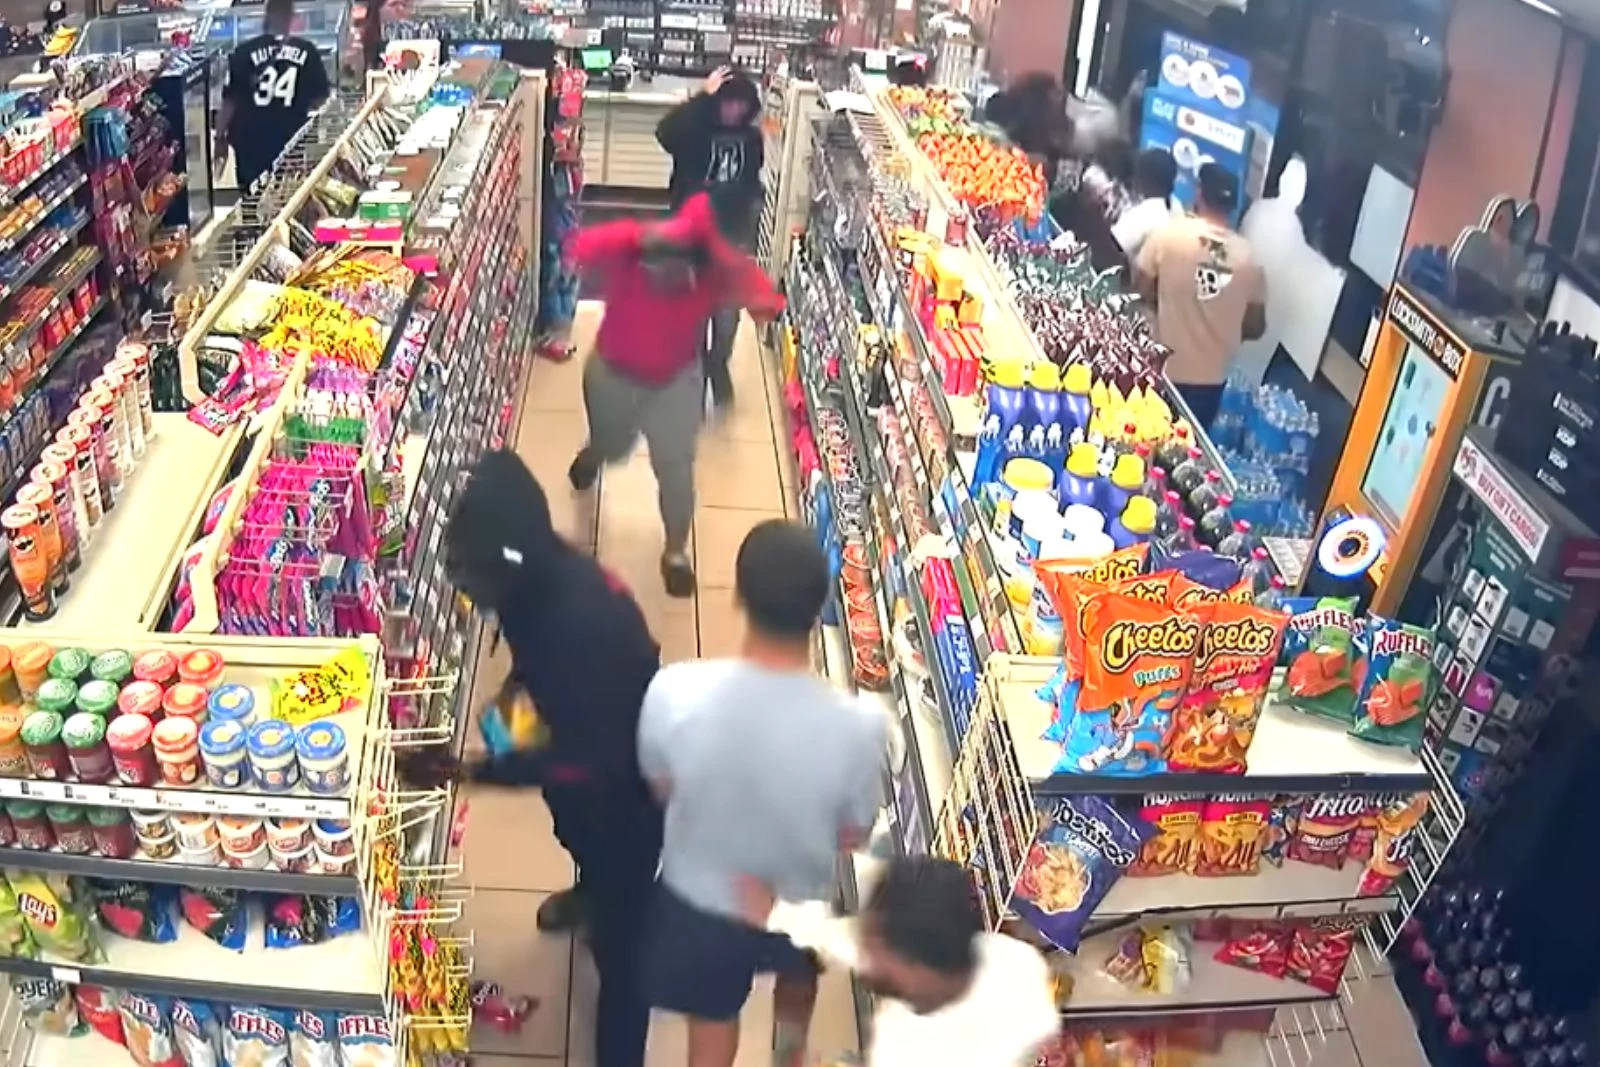 Flash mob' robberies spike at retail outlets piled high with holiday  inventory - The Washington Post